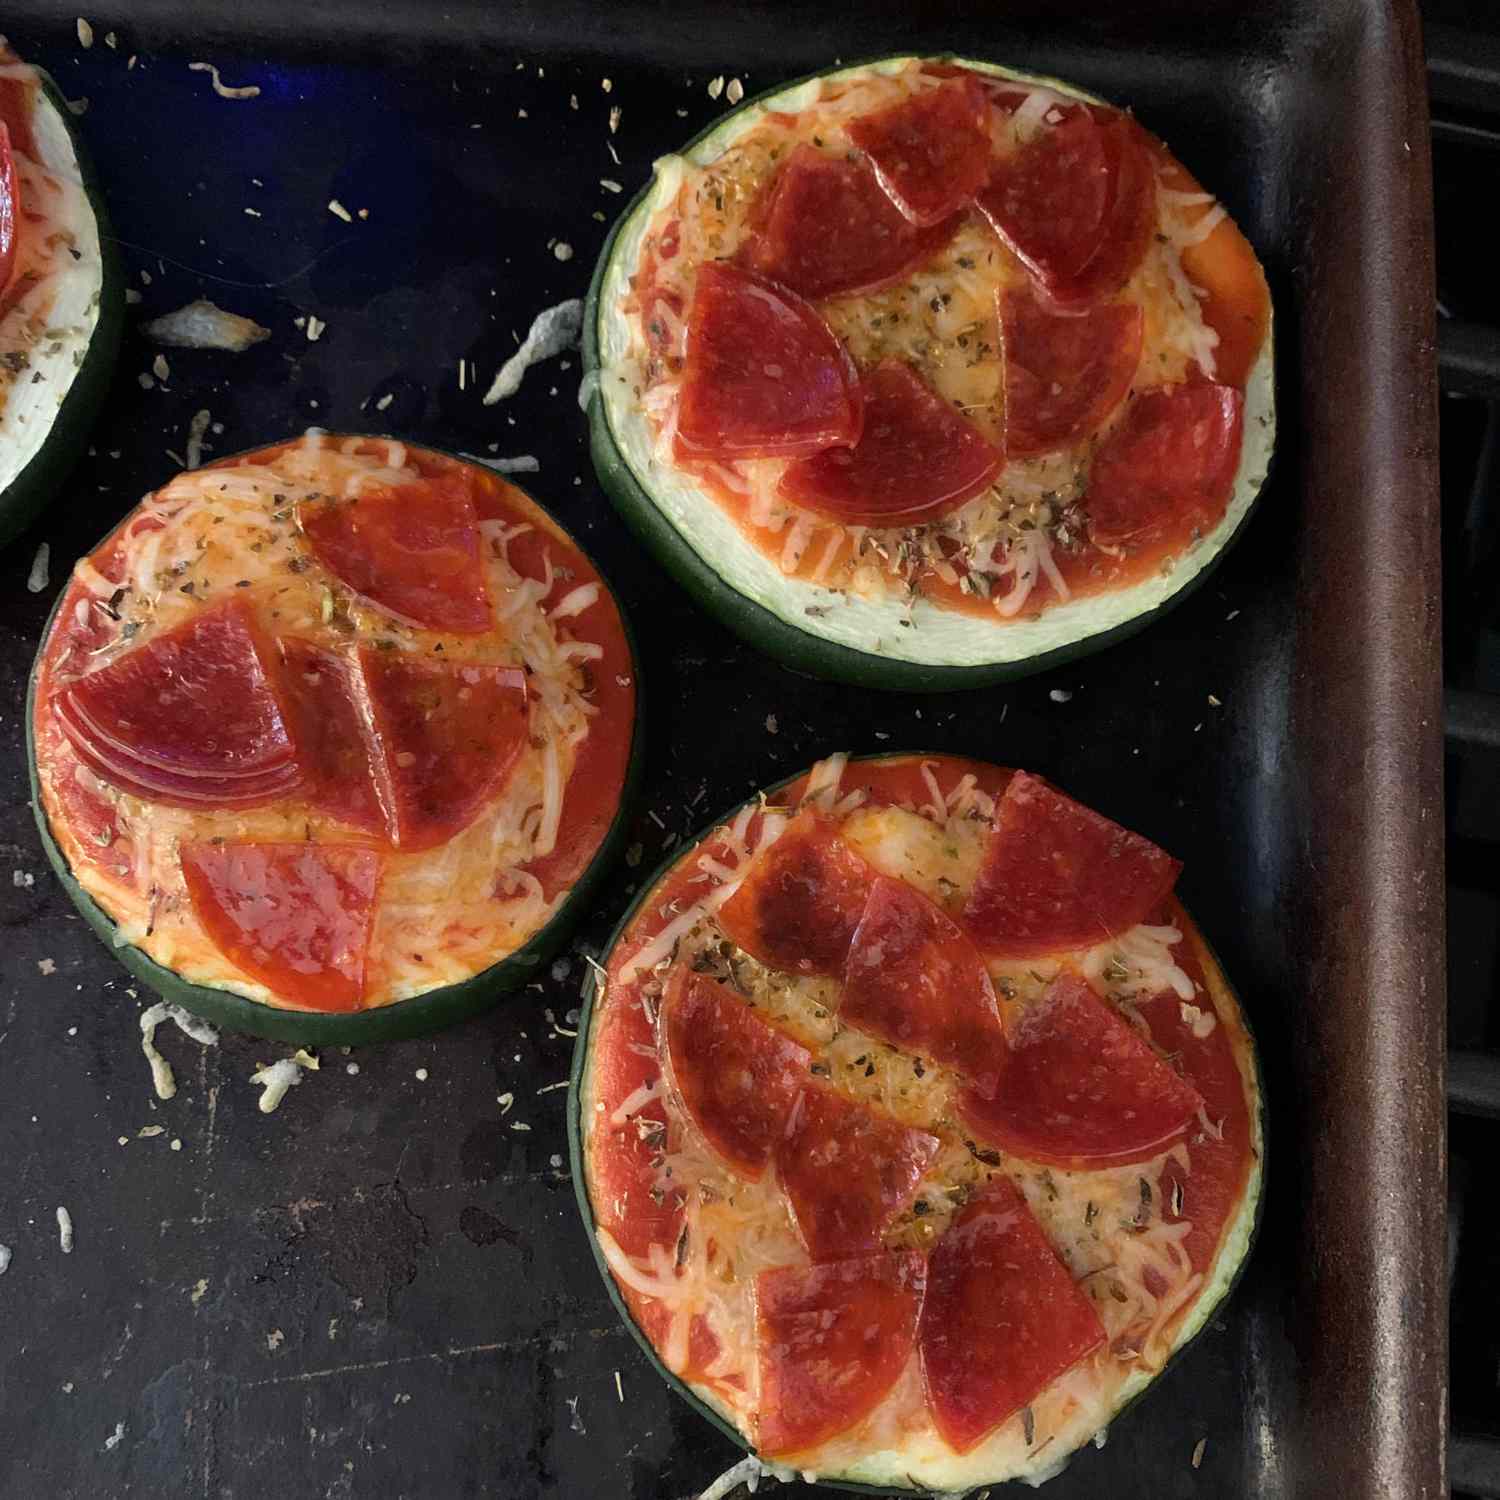 zucchini slices with pepperoni